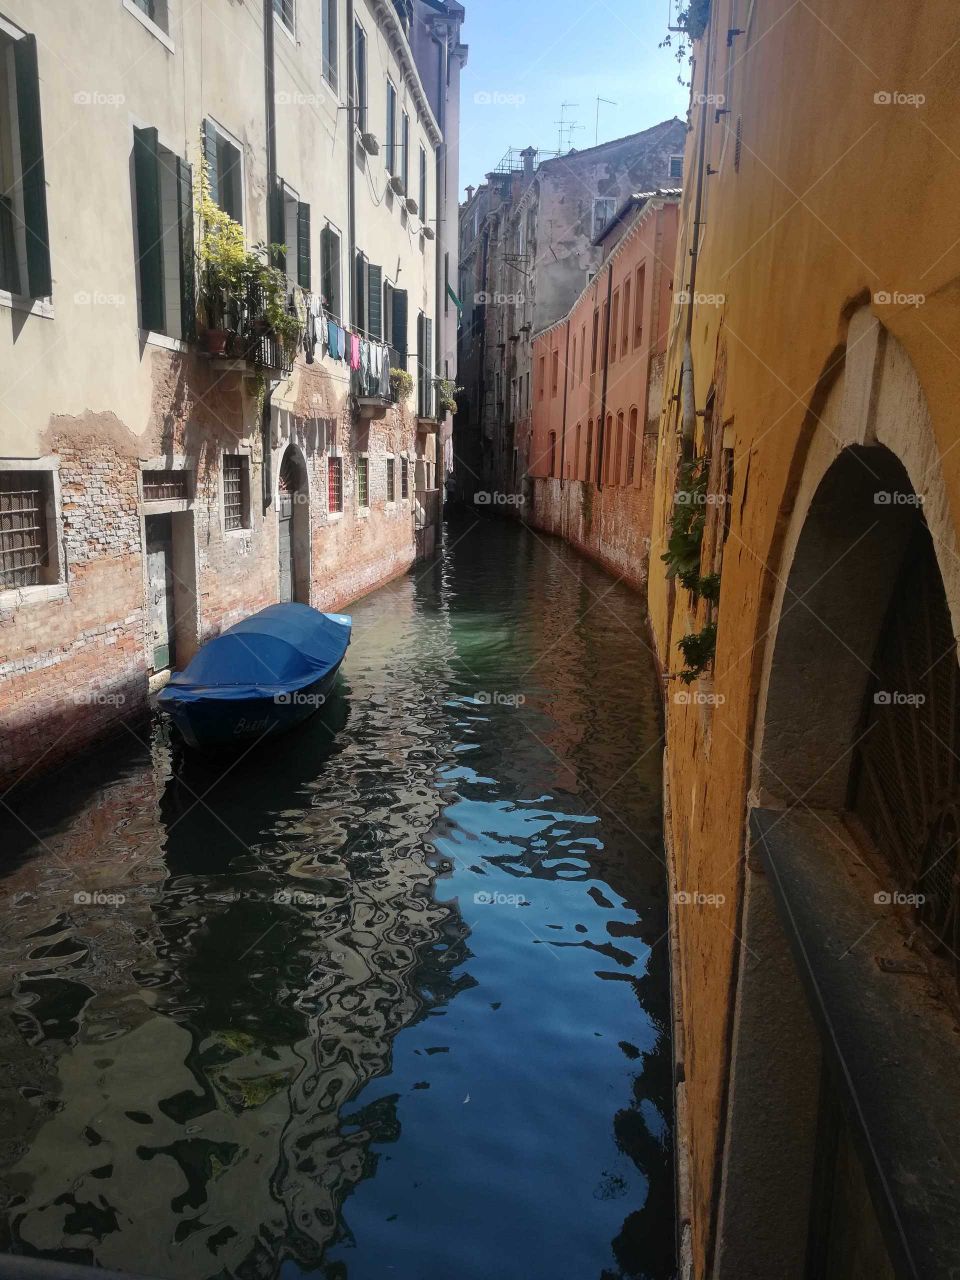 A beautiful view from a corner in Venice!